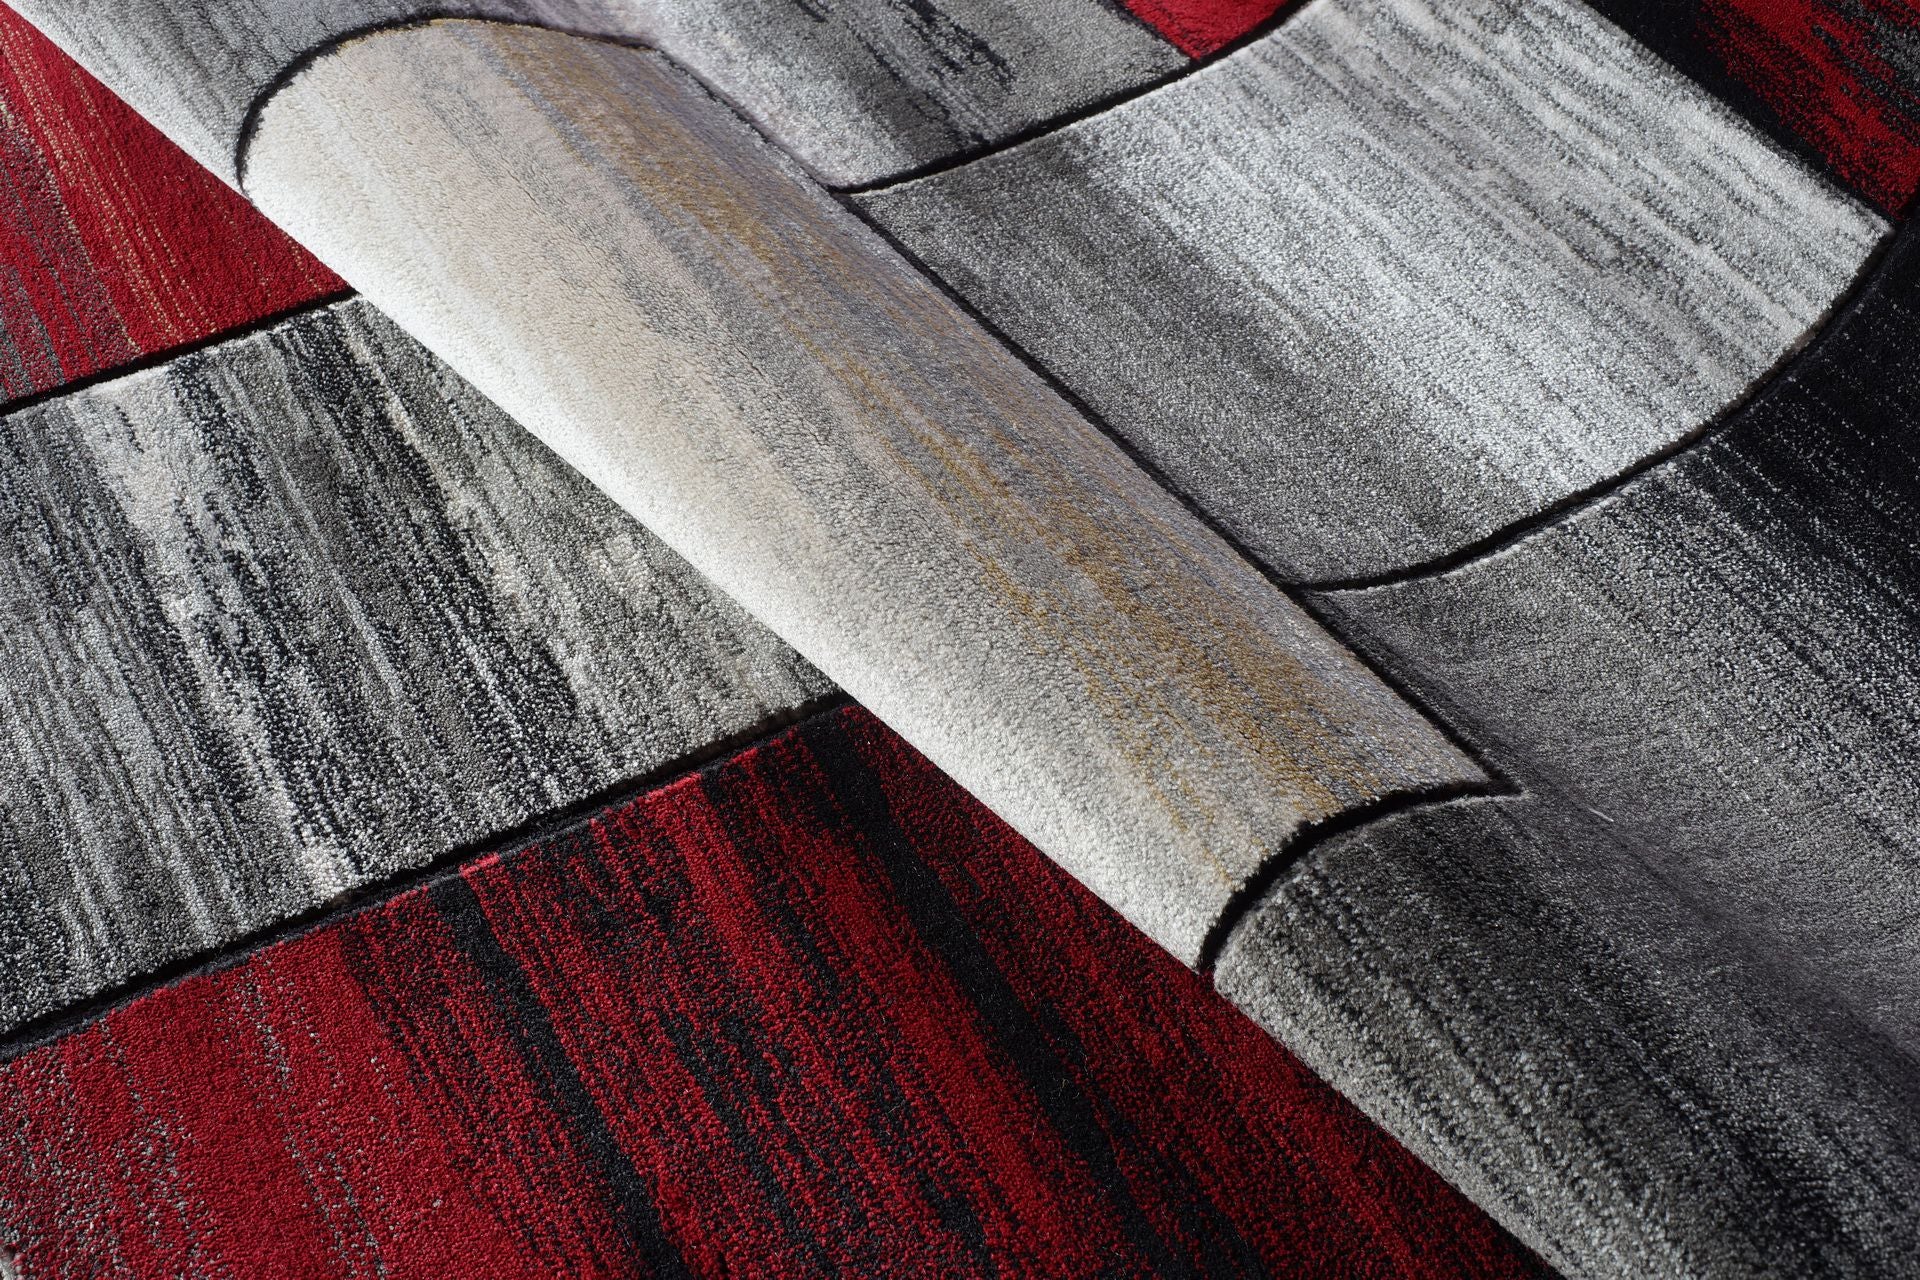 red grey abstract area rug 2x5, 3x5 Runner Rug, Entry Way, Entrance, Balcony, Bedside, Home Office, Table Top